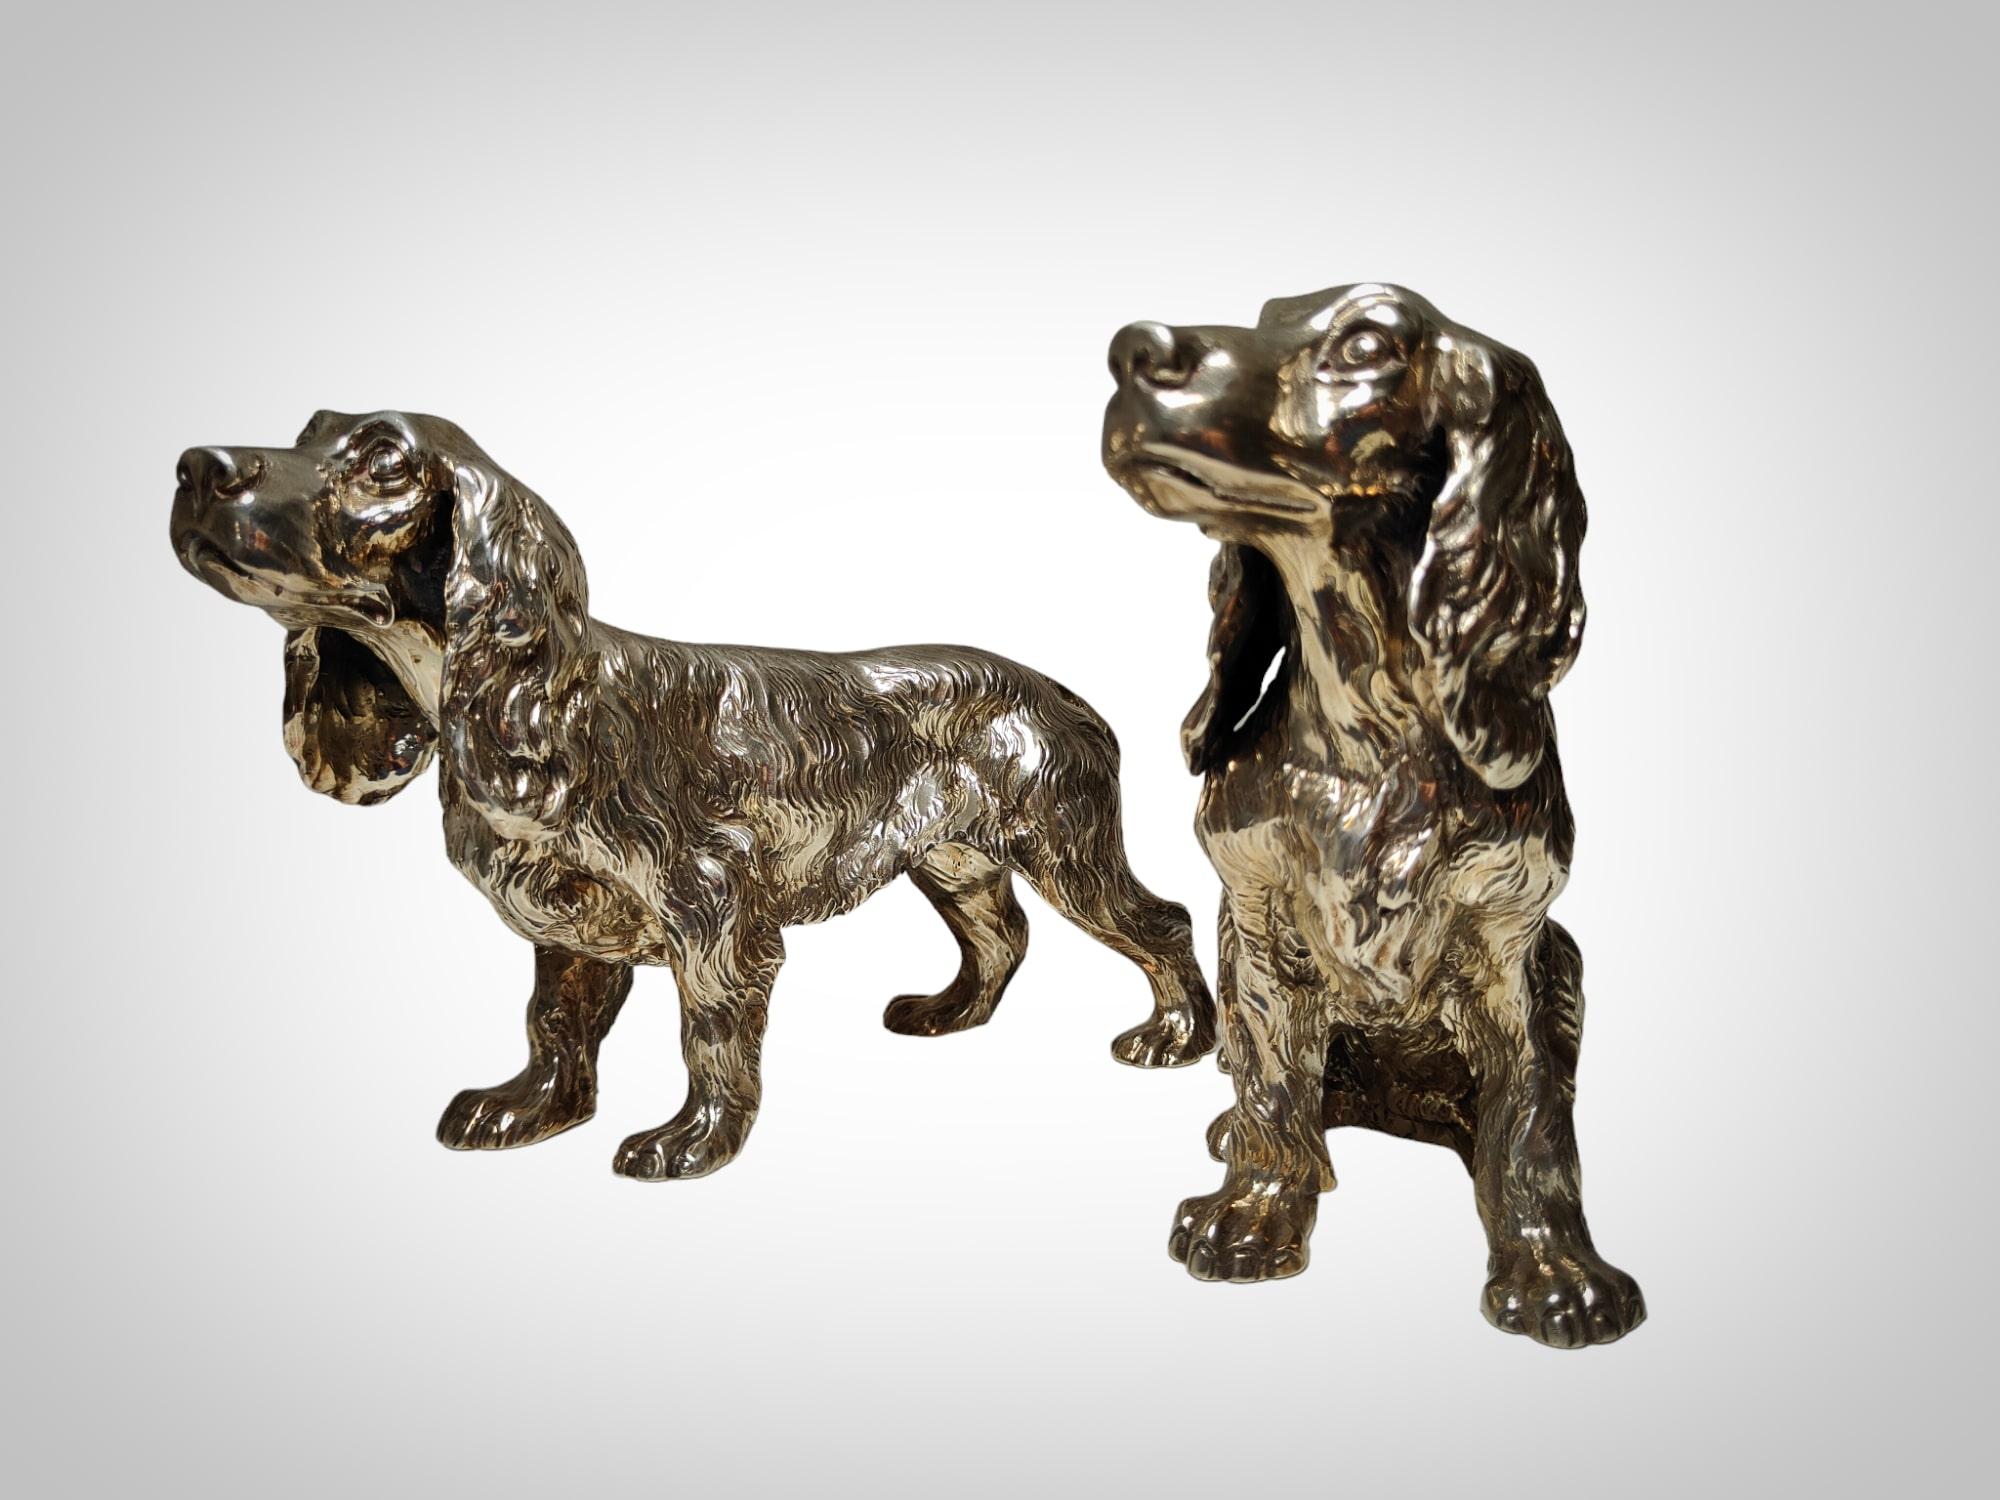 Exquisite Pair of Italian Solid Silver Cocker Spaniel Dogs For Sale 6